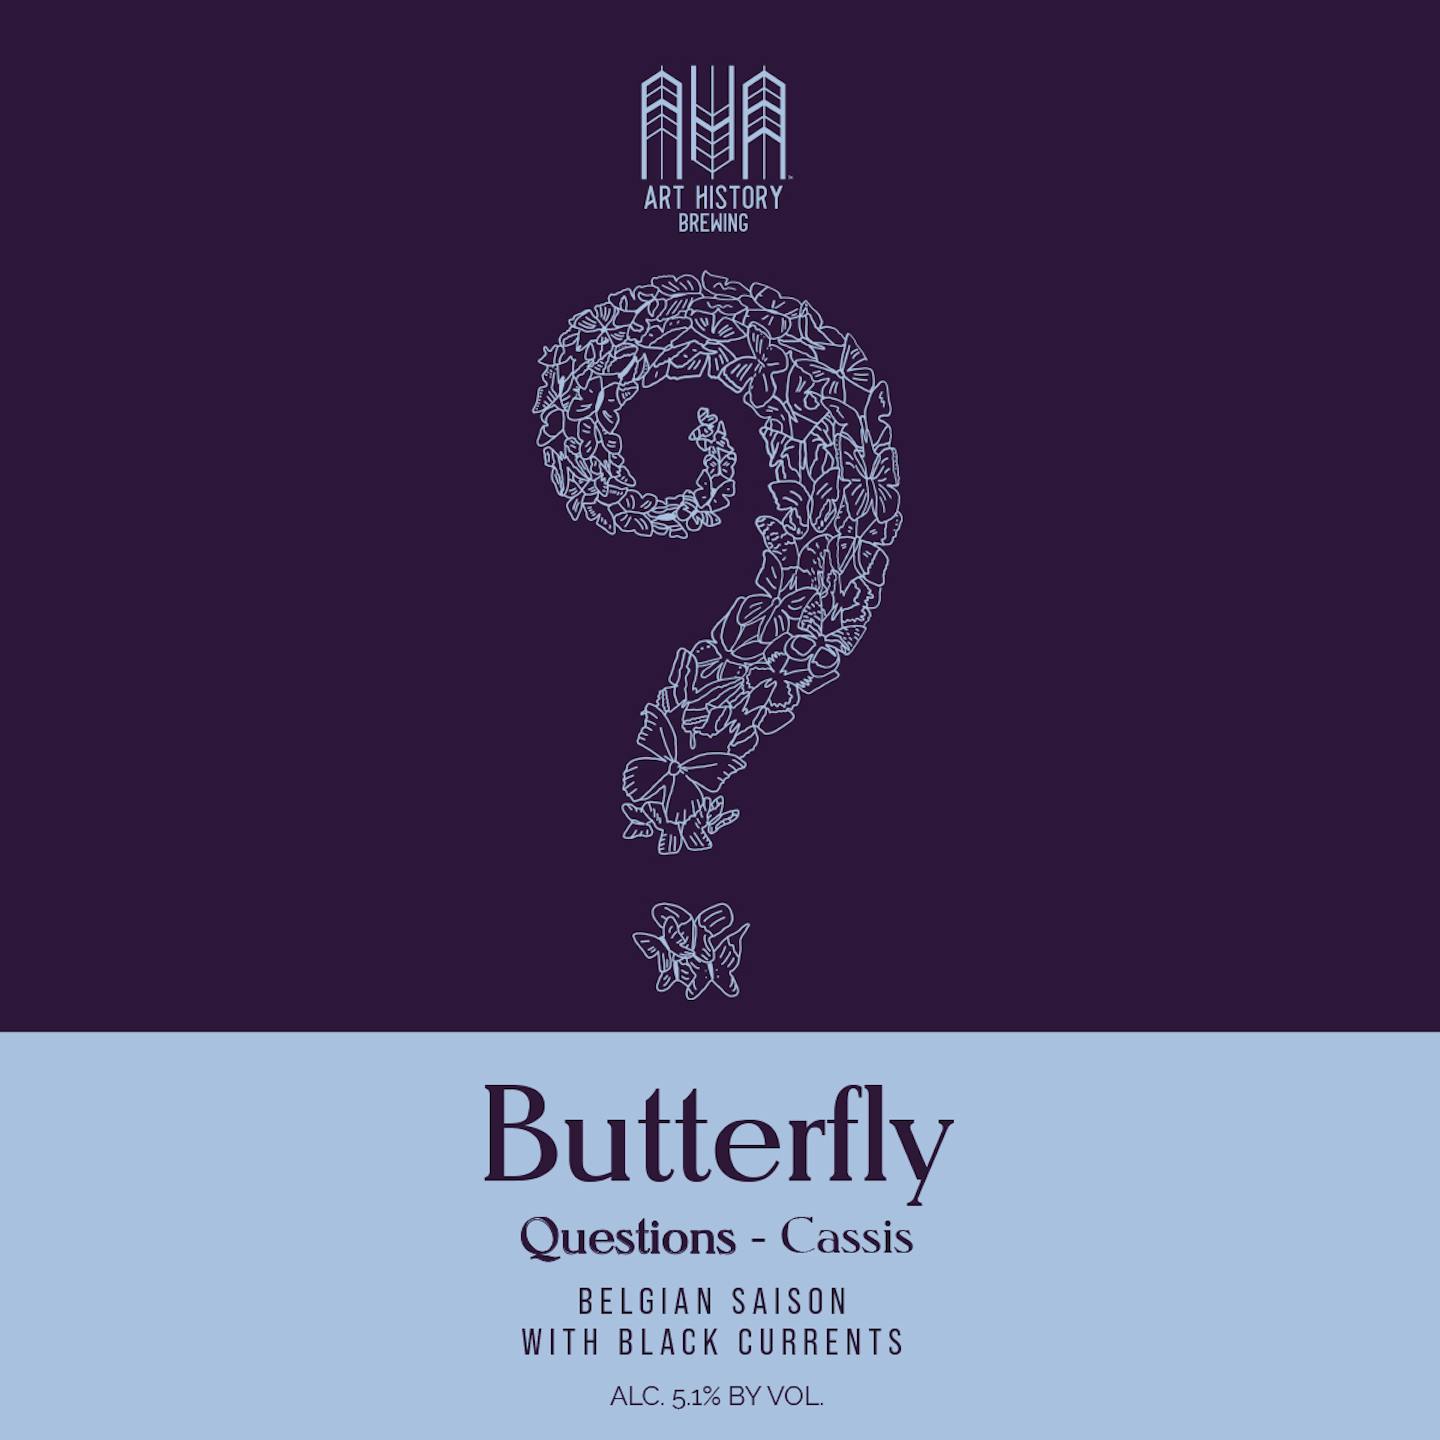 Butterfly Beer Label